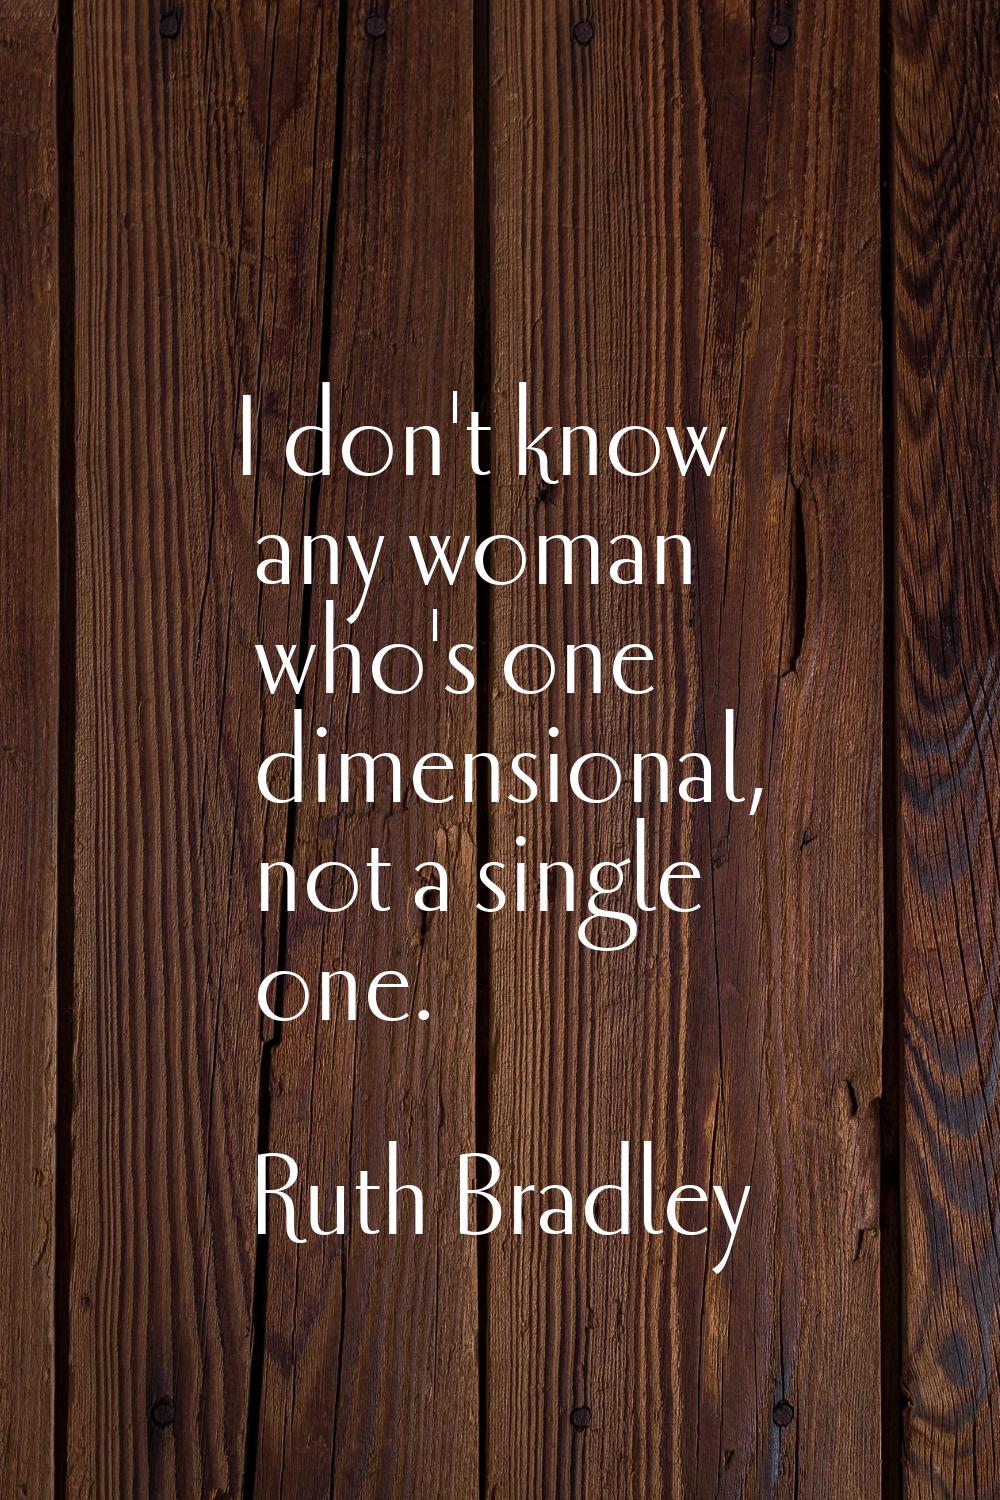 I don't know any woman who's one dimensional, not a single one.